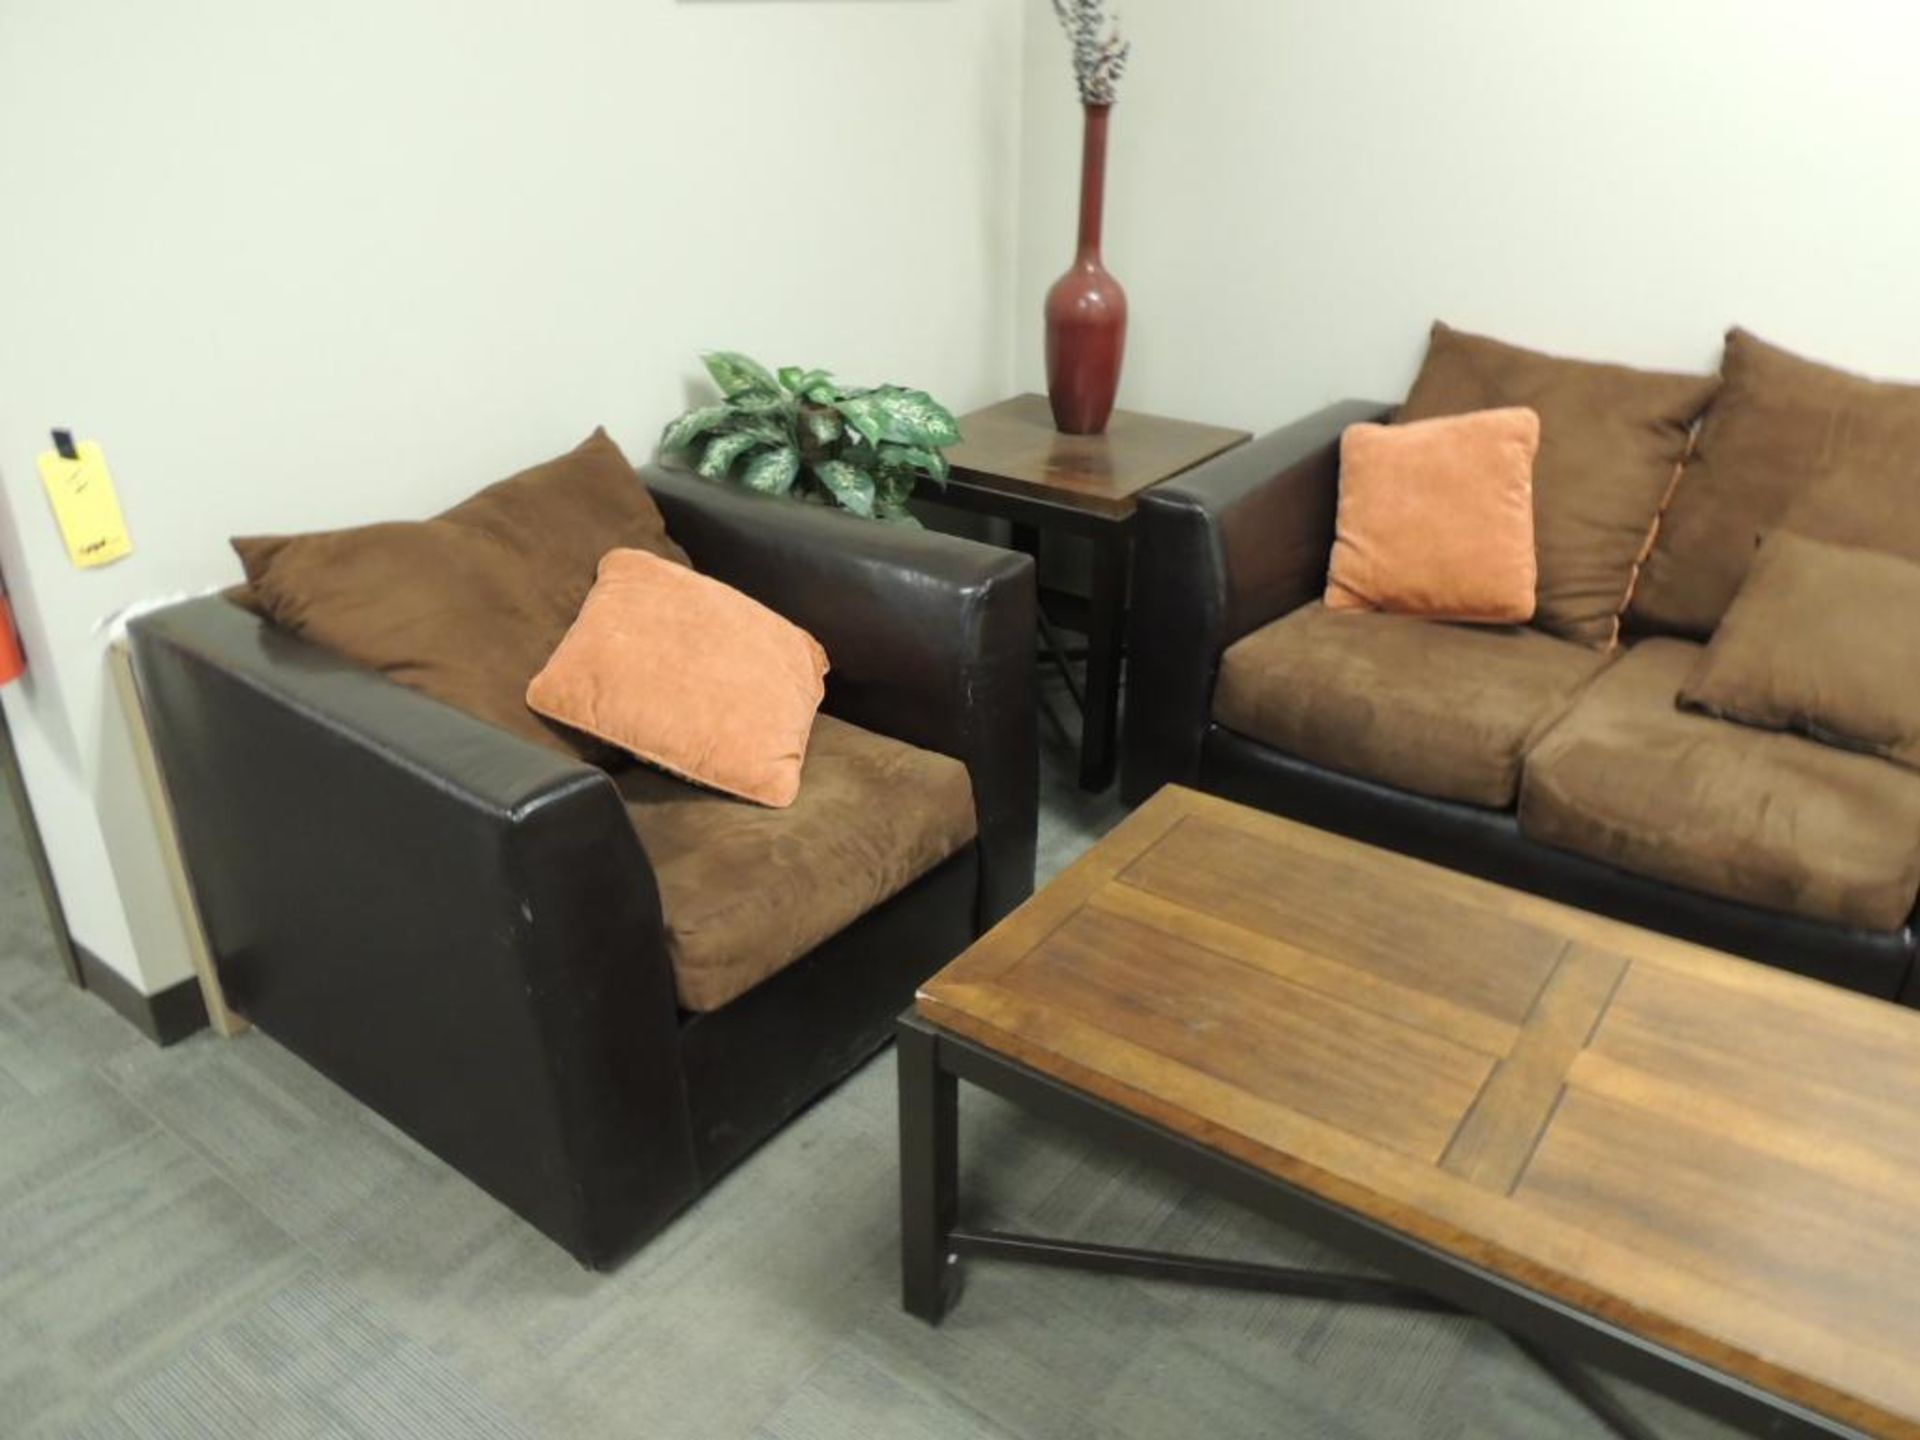 LOT: Contents of Waiting Area including (2) End Tables & Coffee Table by Ashley Furniture, Swivel Ch